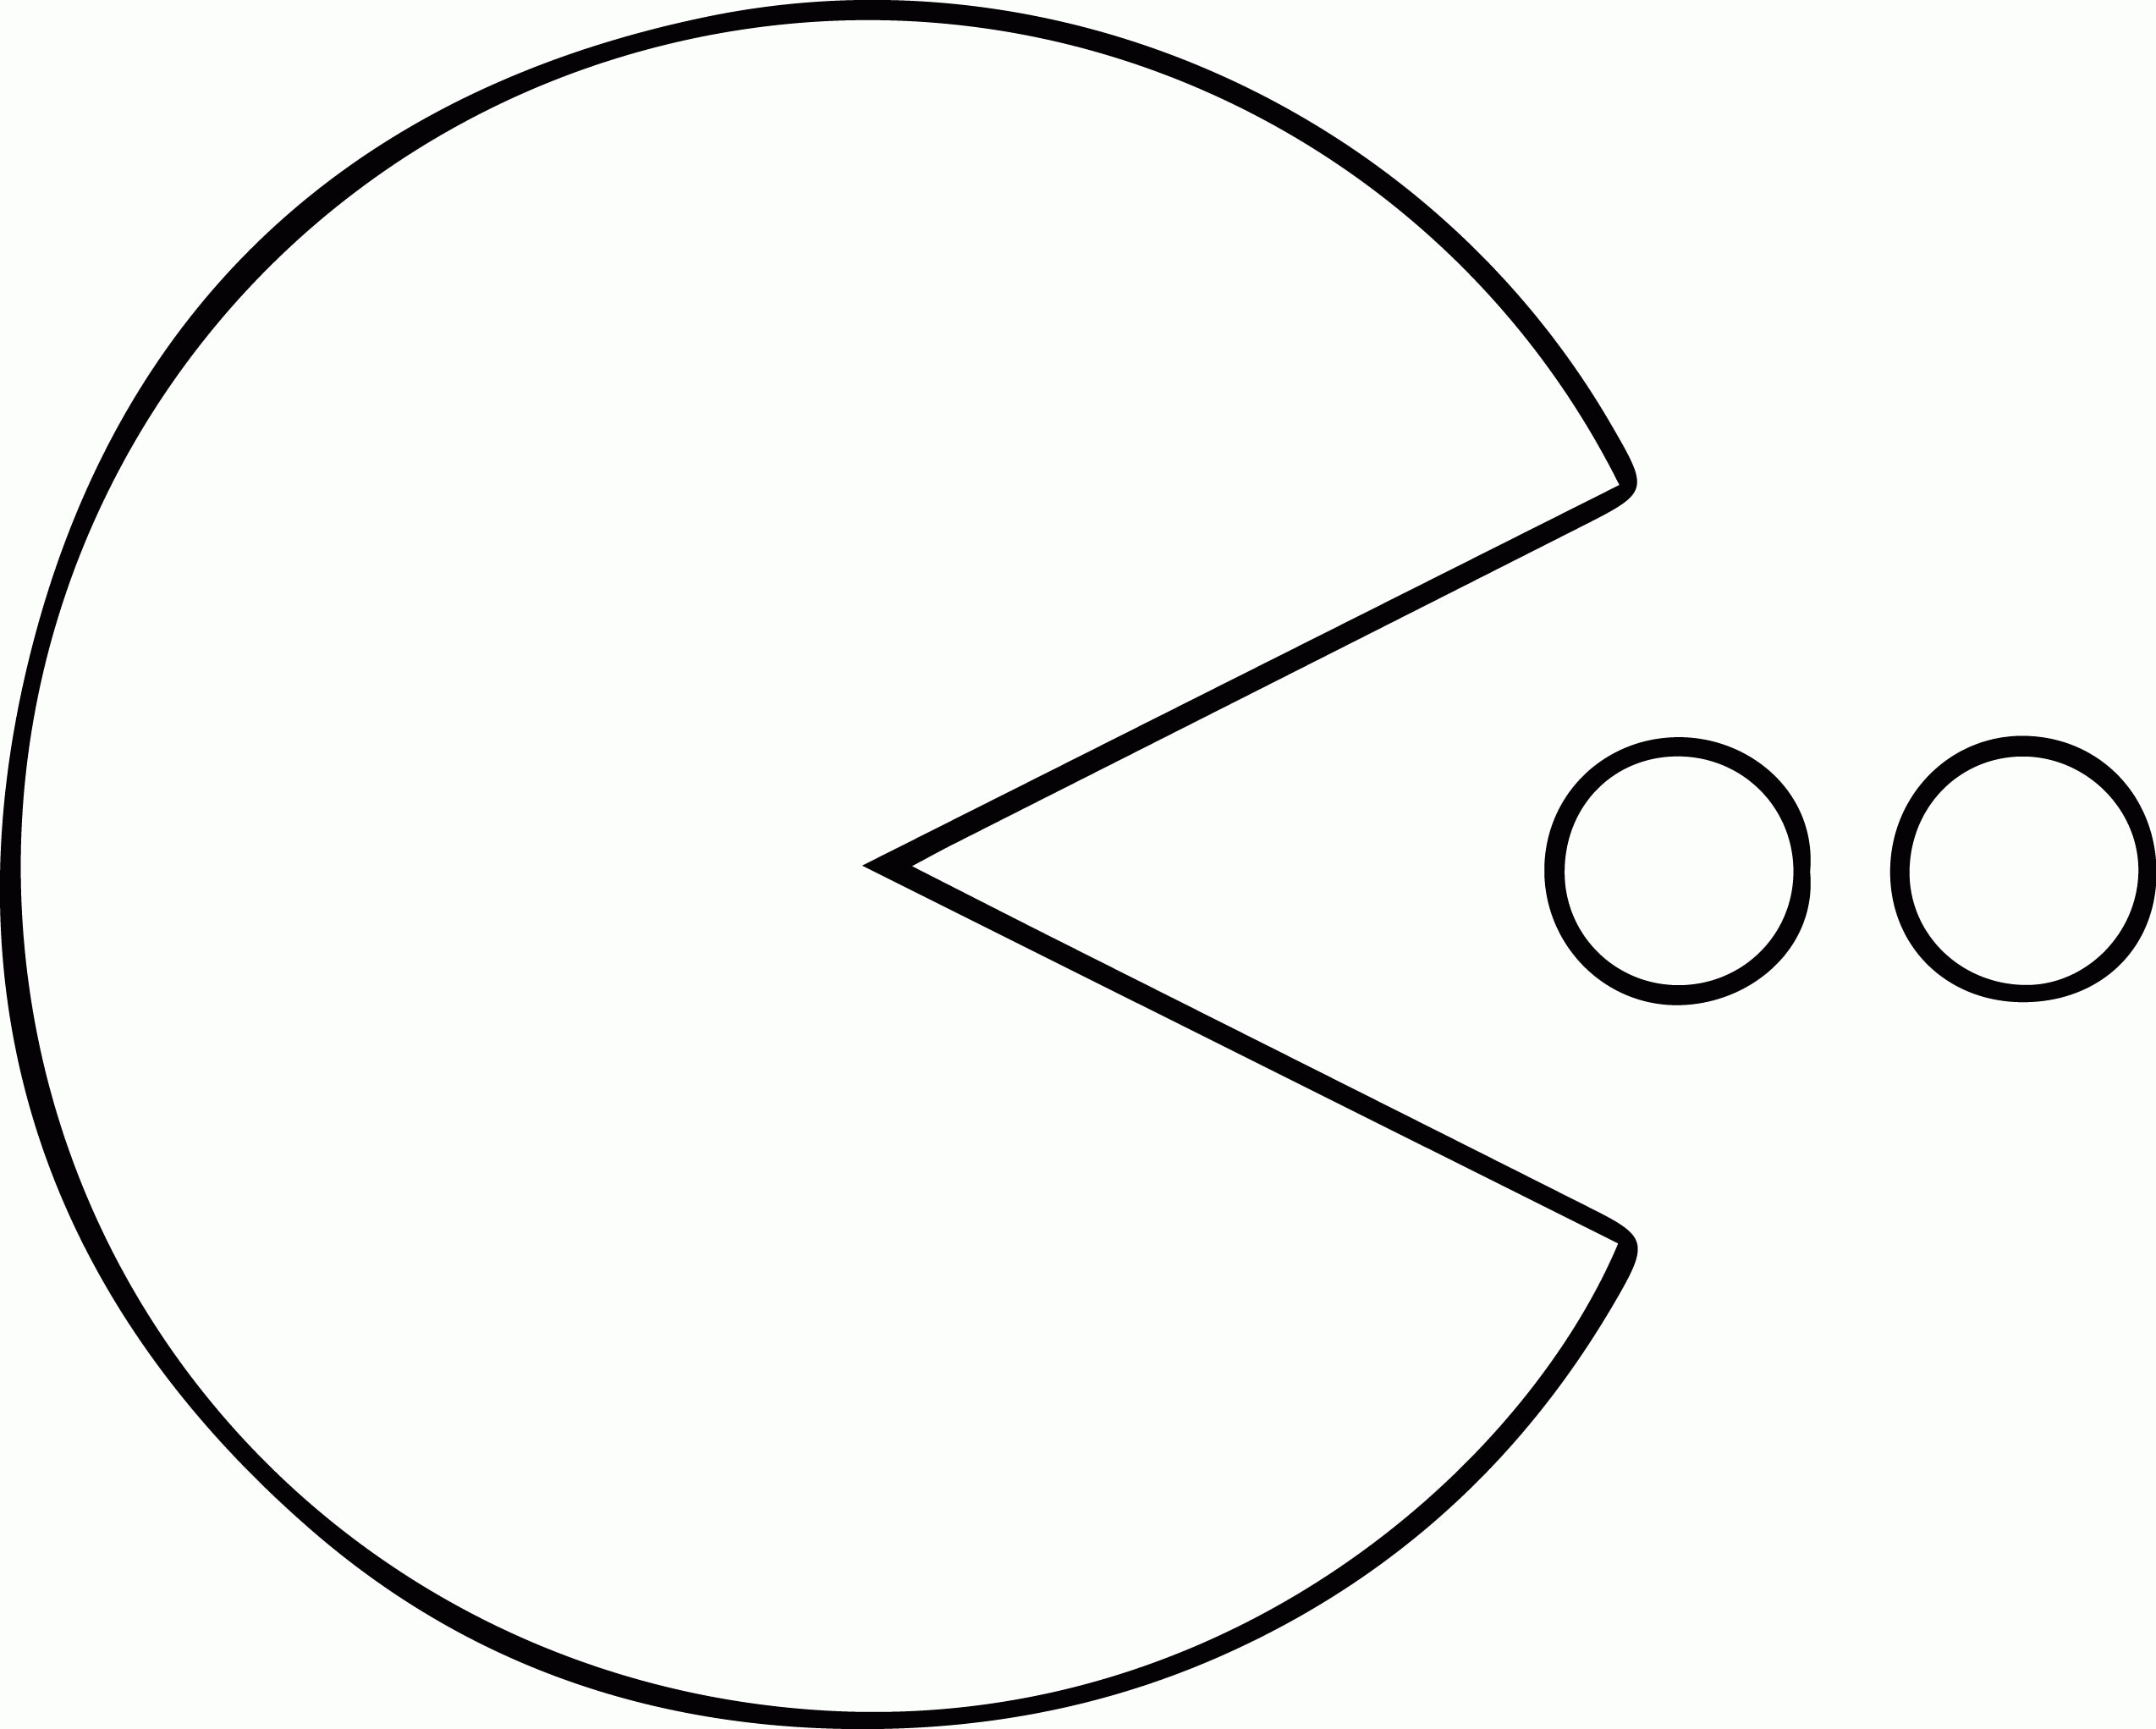 Pacman Coloring - Coloring Pages for Kids and for Adults